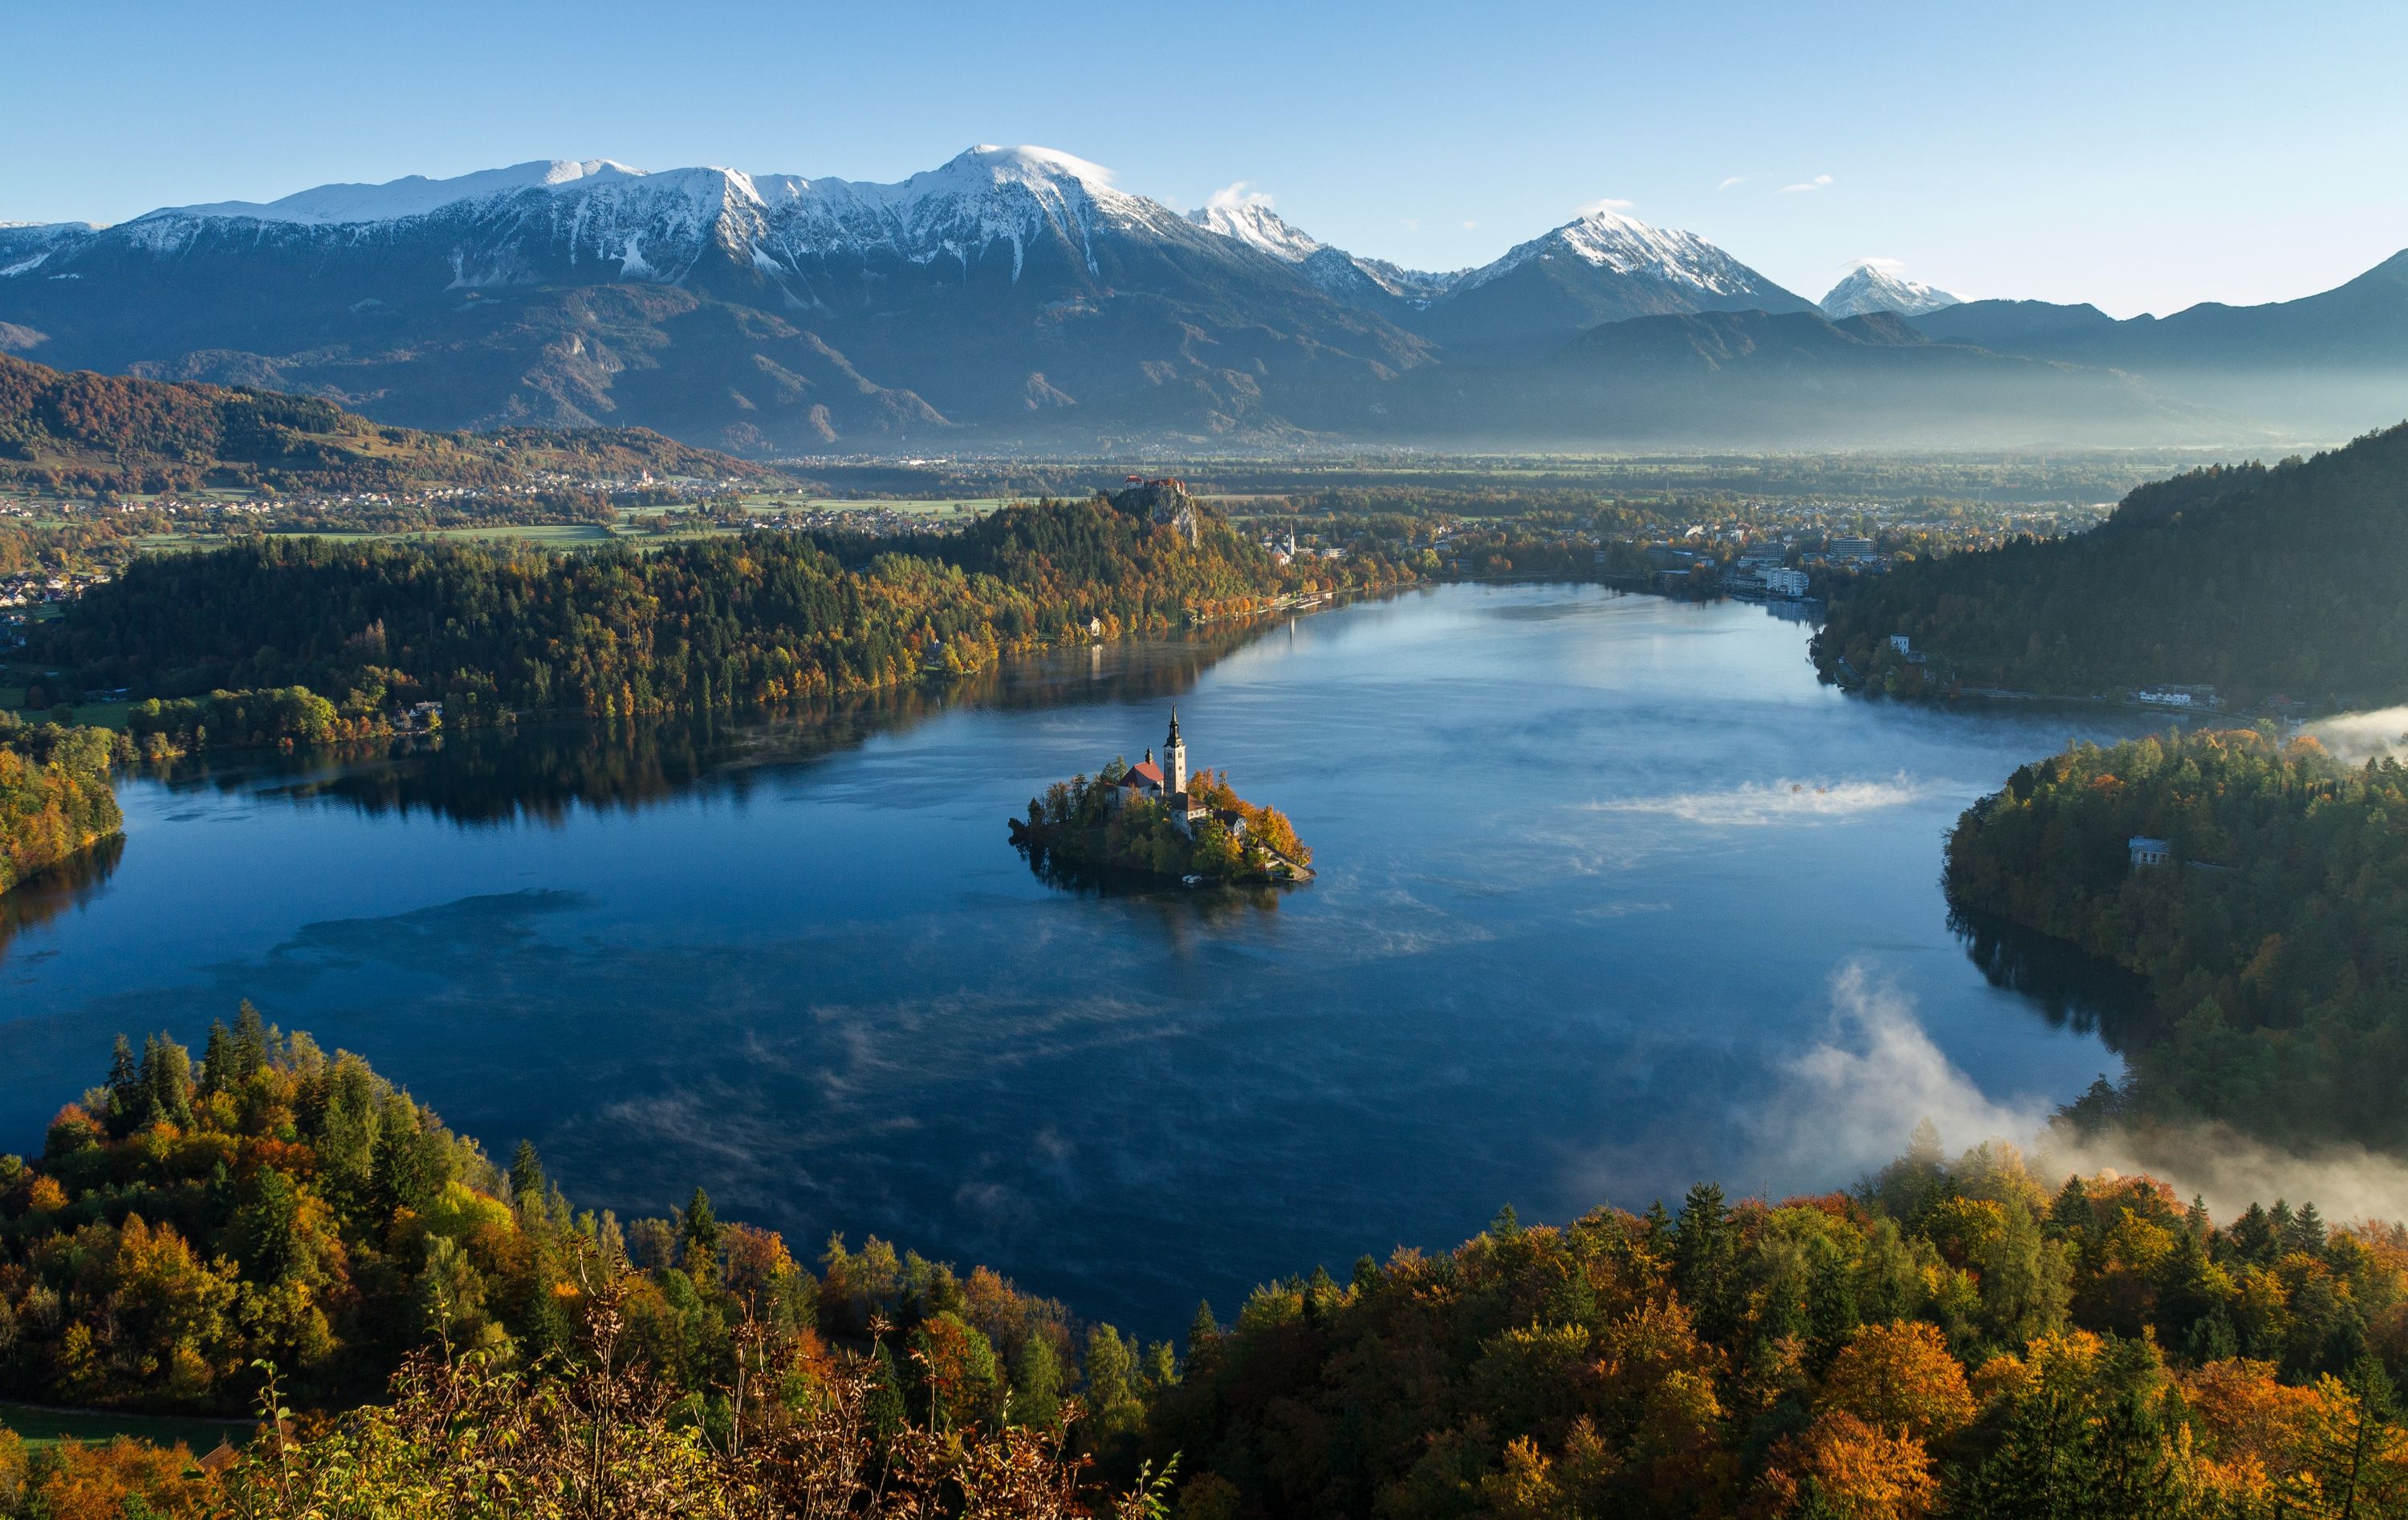 The church on the island in the insanely beautiful Lake Bled, in Slovenia